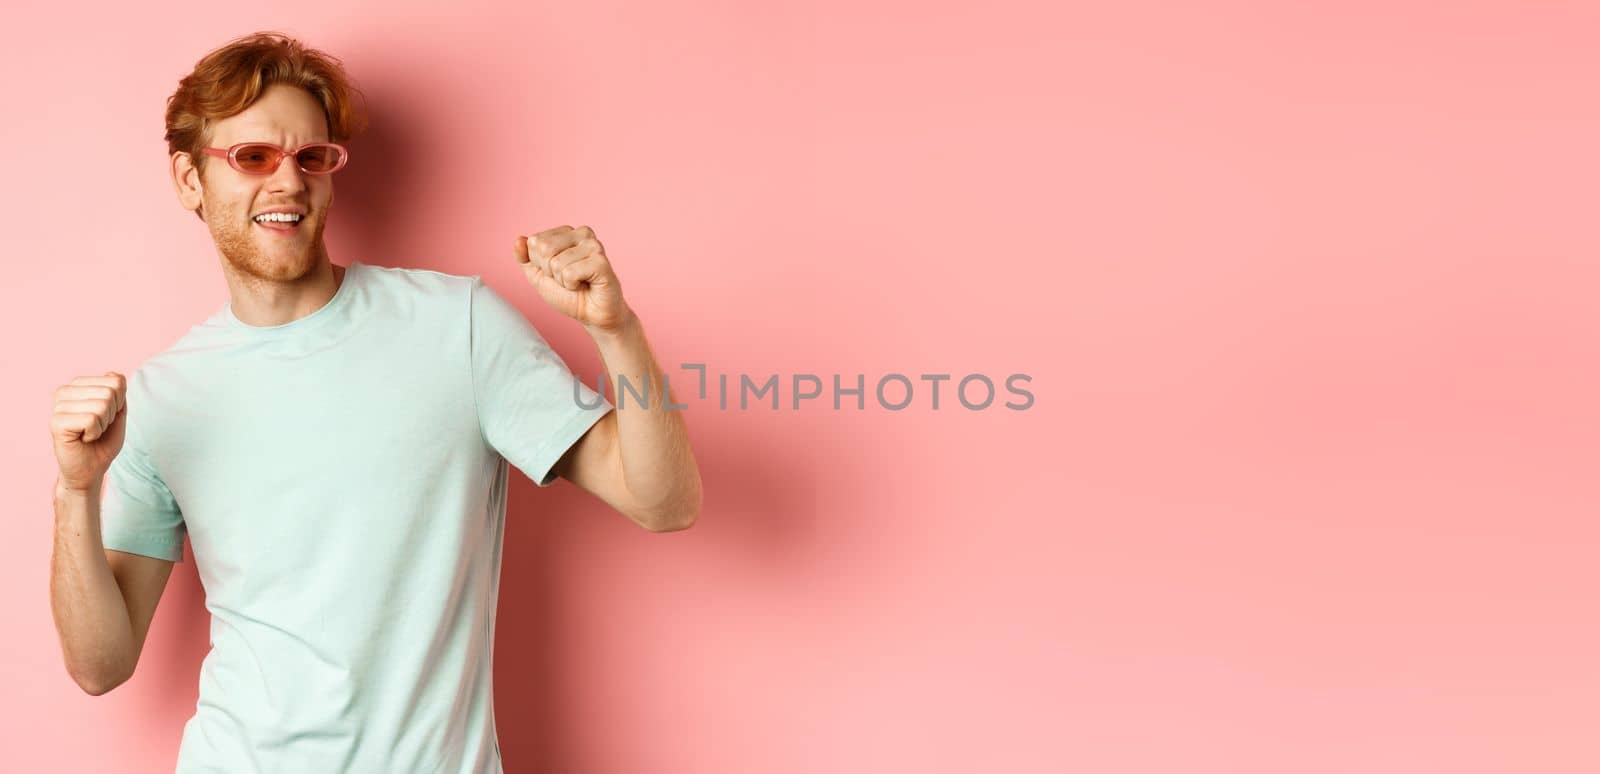 Tourism and vacation concept. Cheerful redhead man having fun at party, dancing and enjoying holiday, standing in sunglasses and t-shirt against pink background.